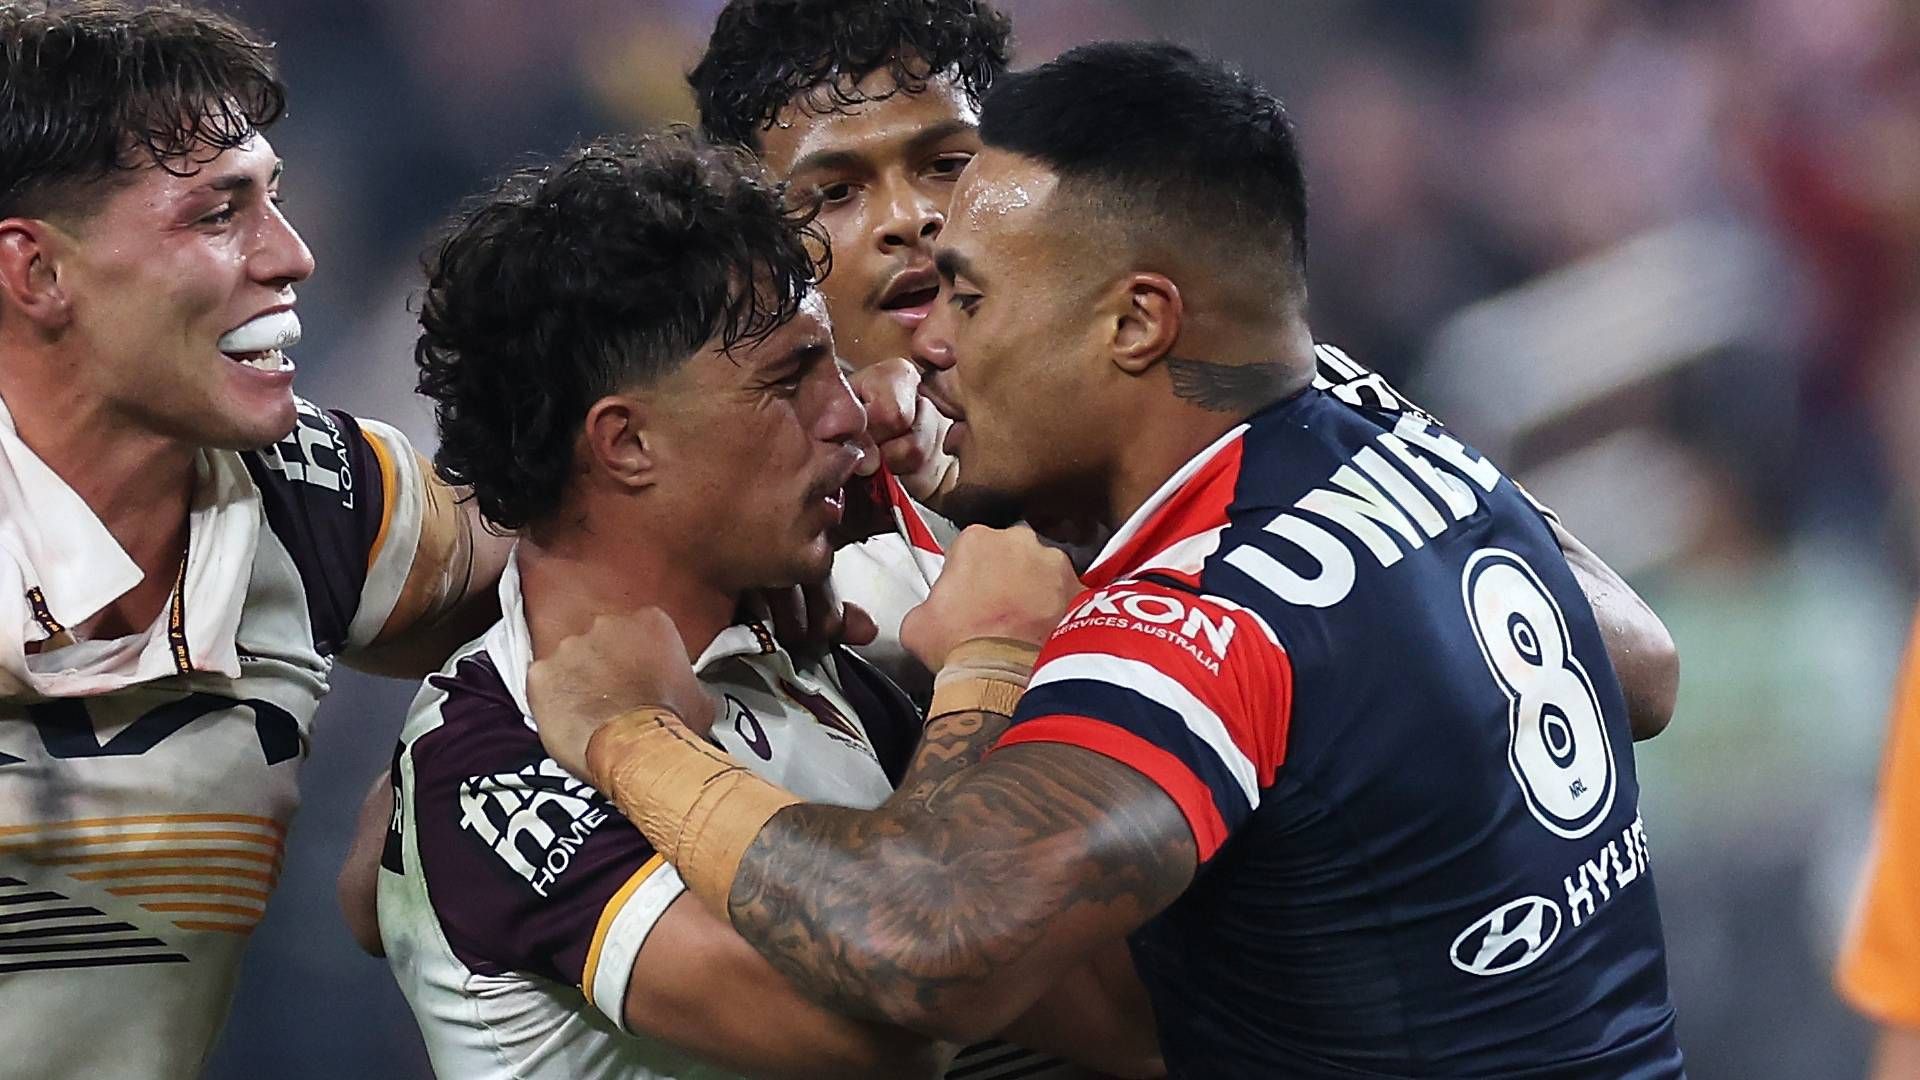 Broncos, Latrell Mitchell respond to Spencer Leniu's apology as Roosters prop pleads guilty over Ezra Mam incident